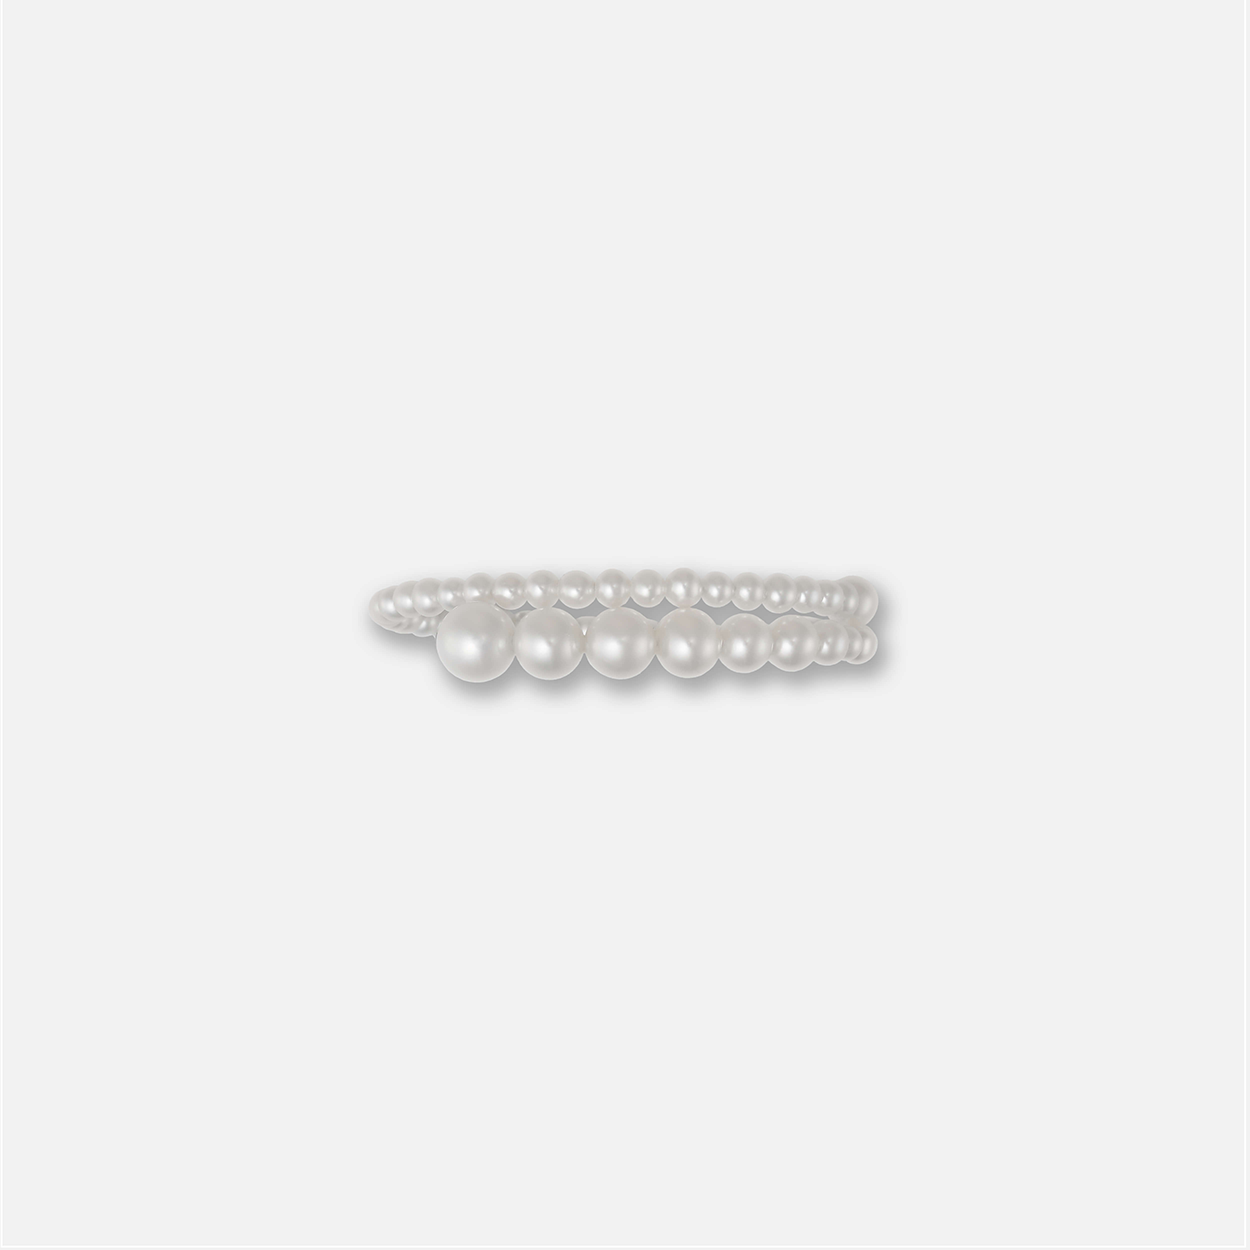 Stunning pearl bracelet against a white backdrop, a timeless piece that exudes class and elegance.